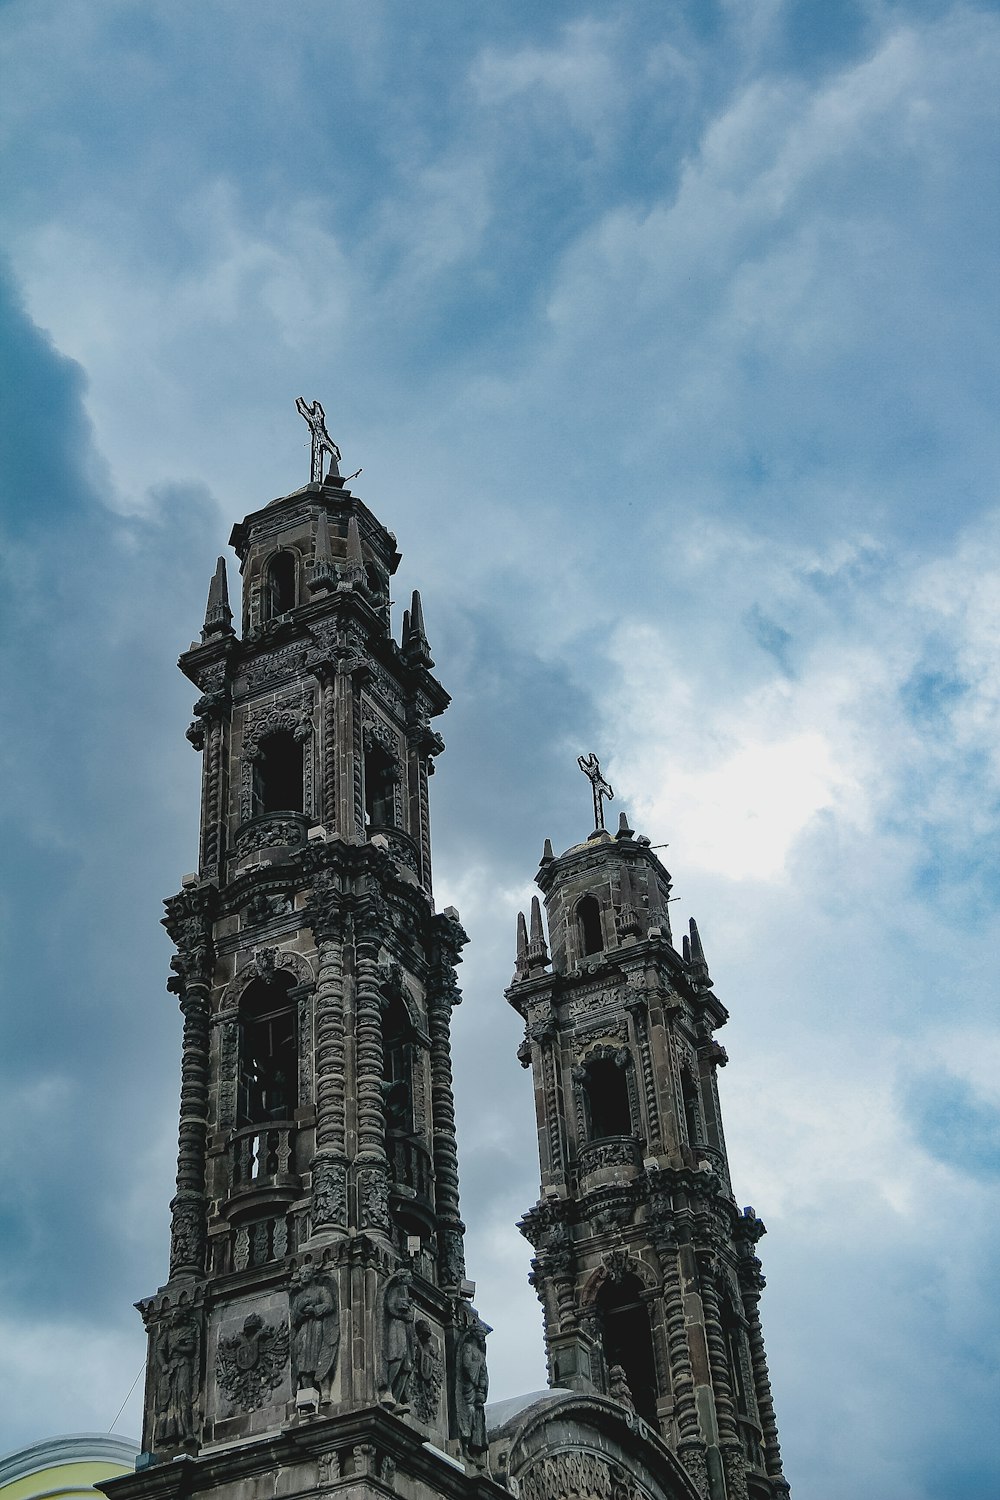 two tall towers with statues on them against a cloudy sky